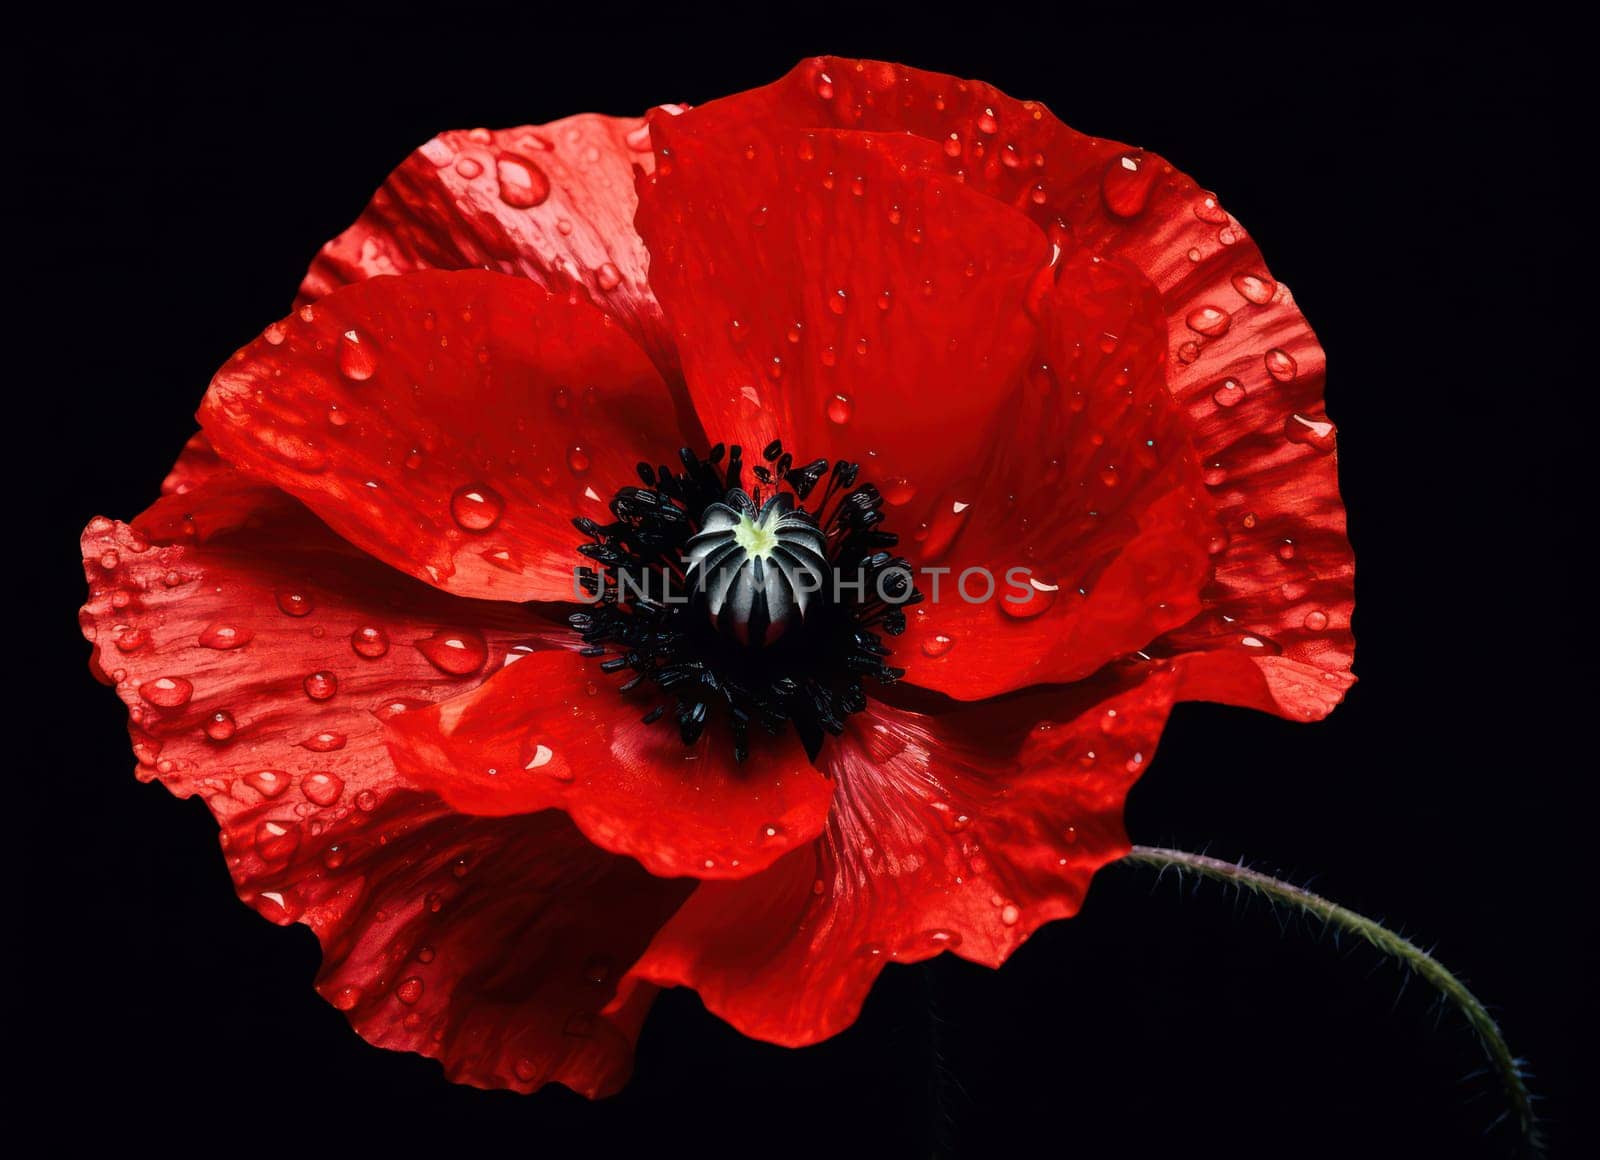 Vibrant Blooming Poppy: A Delicate Red Flower Amidst a Colorful Summer Meadow